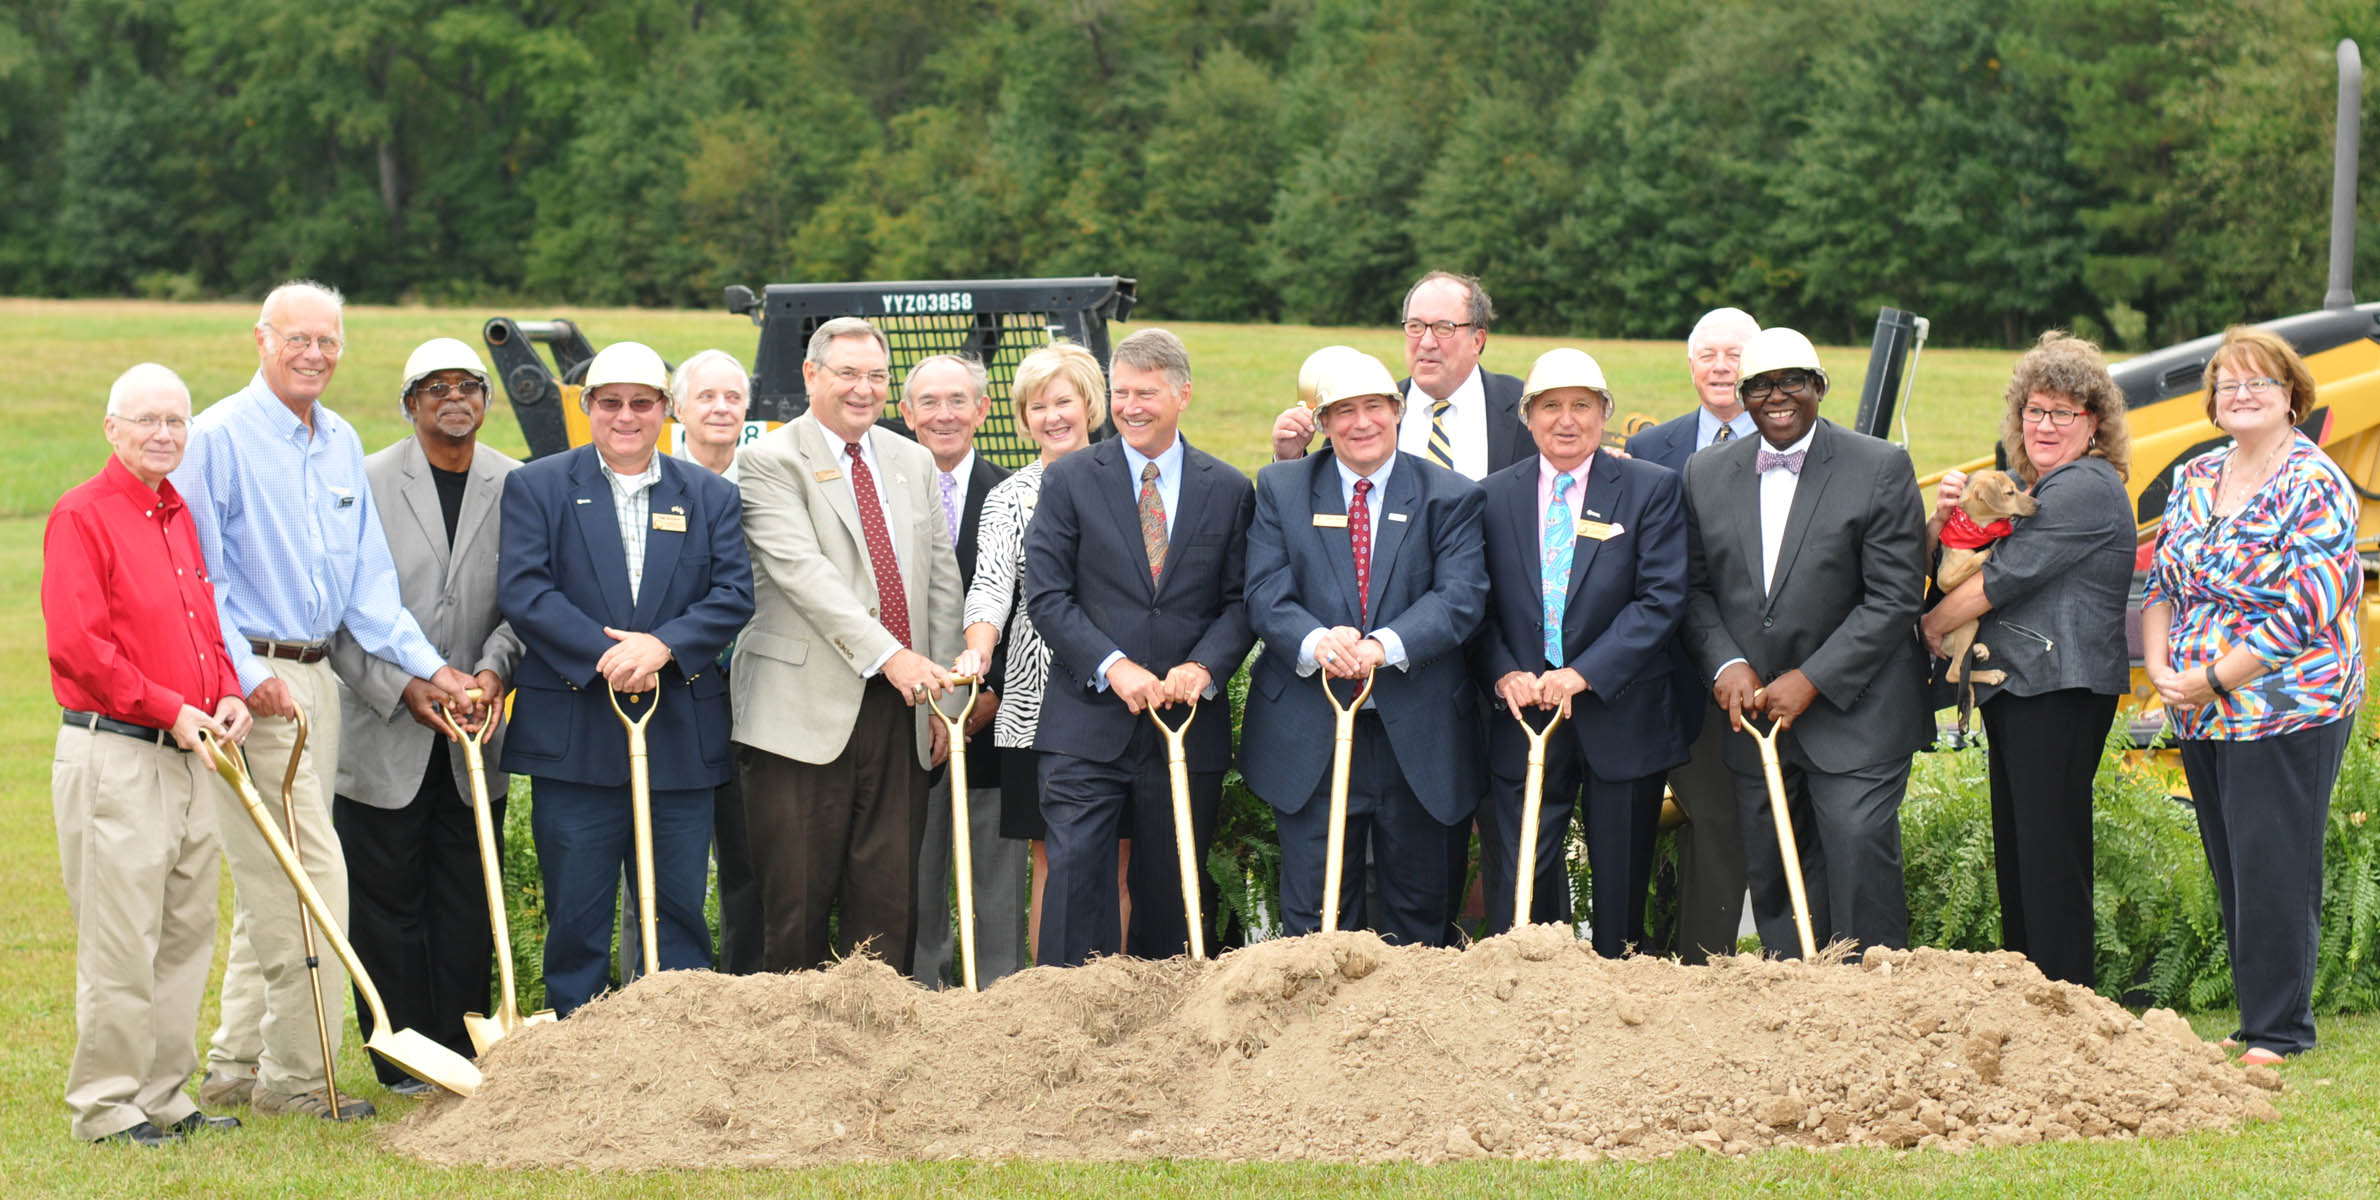 Click to enlarge,  Members of the Central Carolina Community College Board of Trustees join with former North Carolina Lt. Gov. Dennis Wicker and members of the Lee County Board of Commissioners for the groundbreaking ceremony for the four Central Carolina Community College bond projects that were approved by Lee County voters in November 2014. 